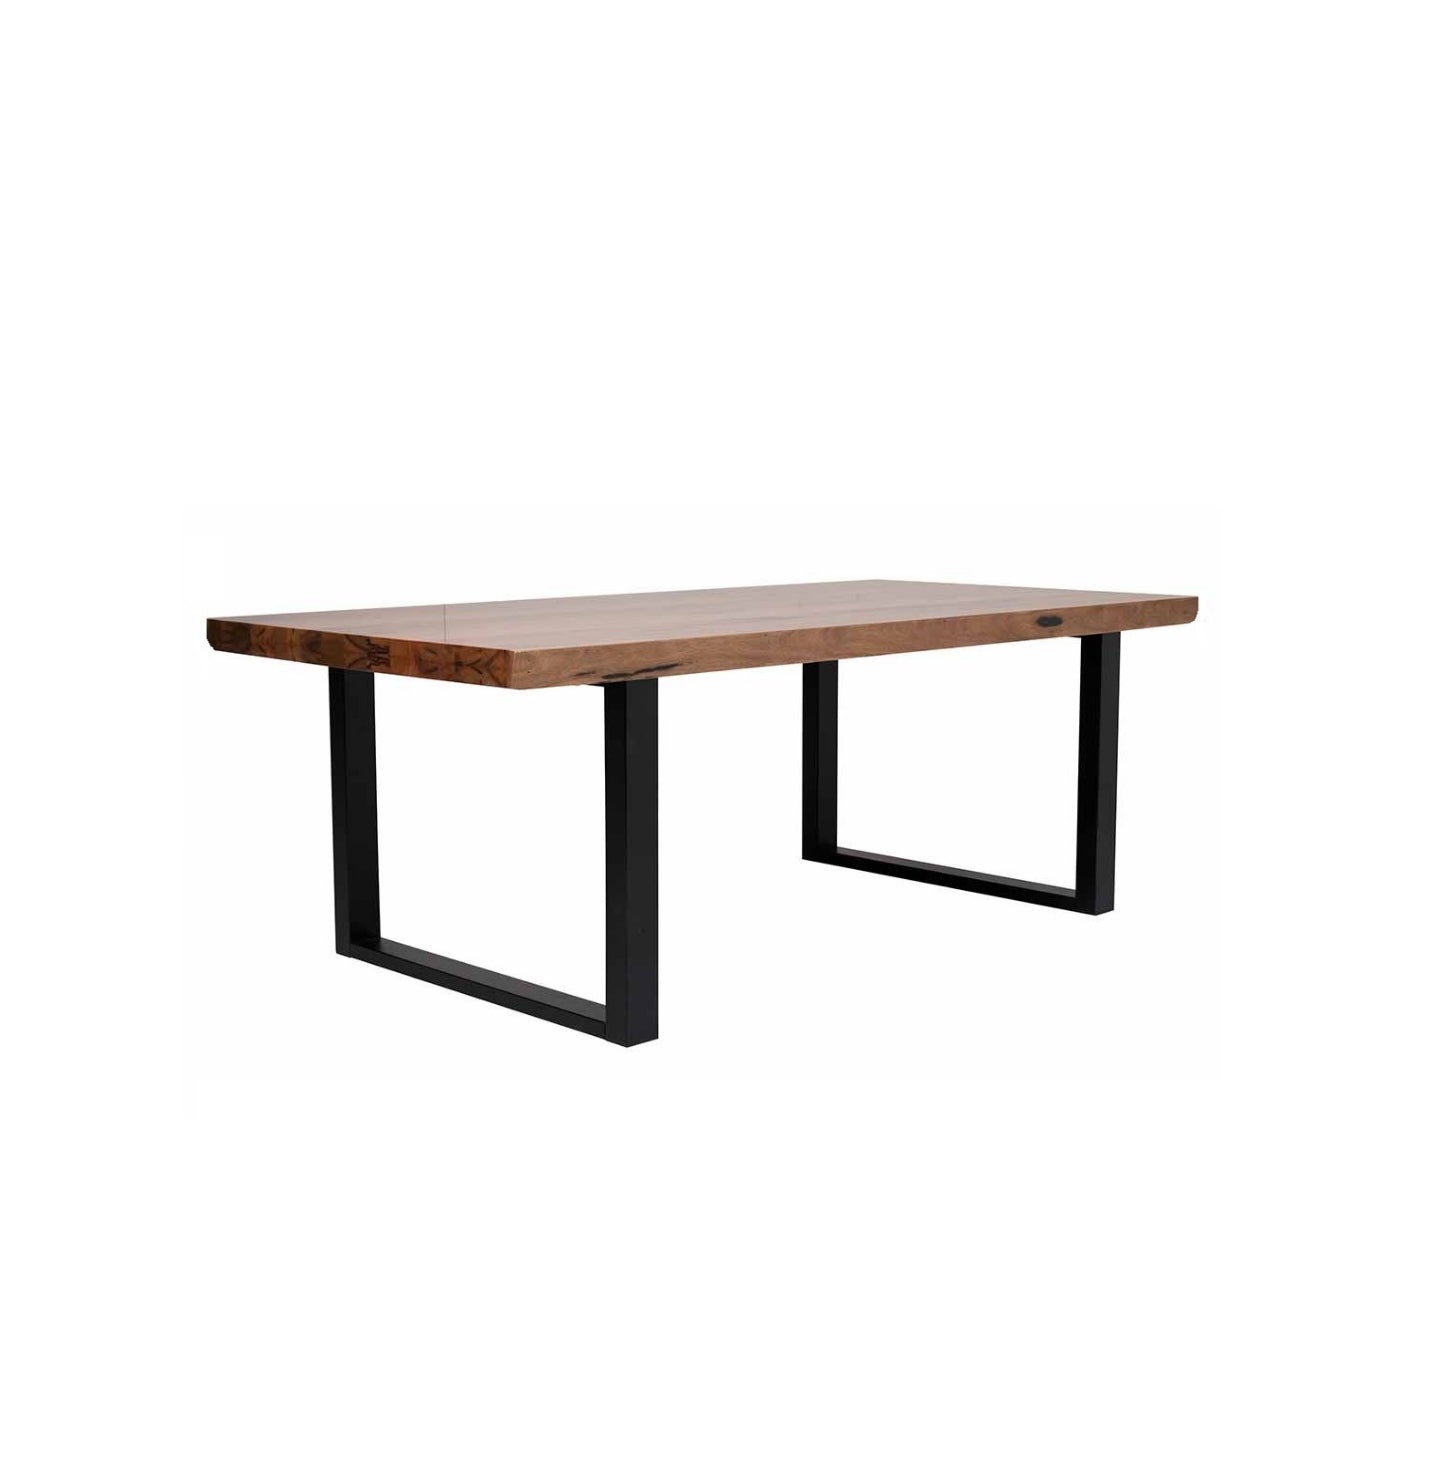 Marri Timber Dining Table with Metal Legs (L160cm)